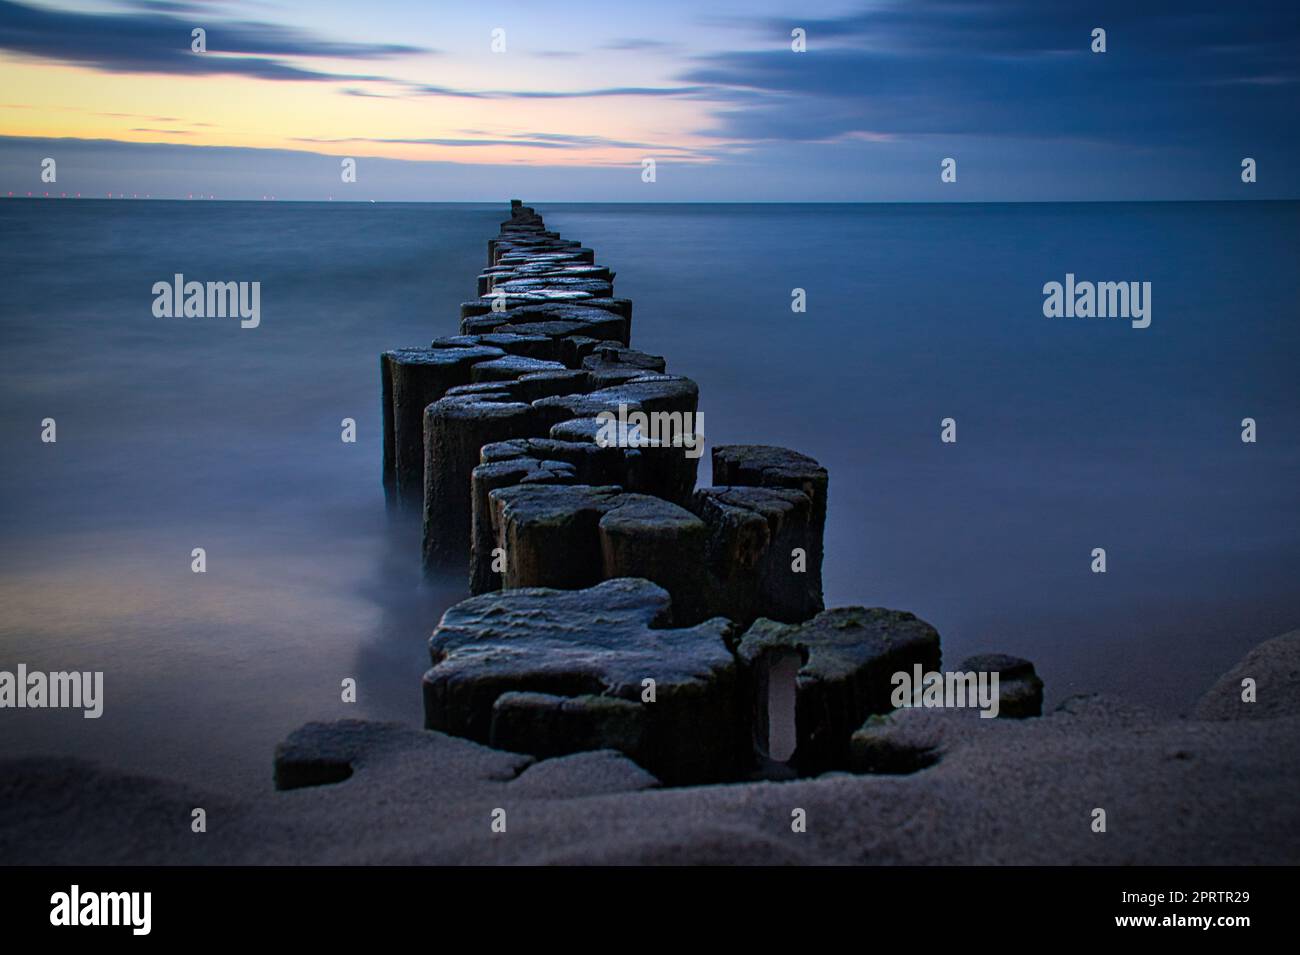 Groynes protruding into the horizon in the Baltic Sea. Long exposure with muted colors Stock Photo